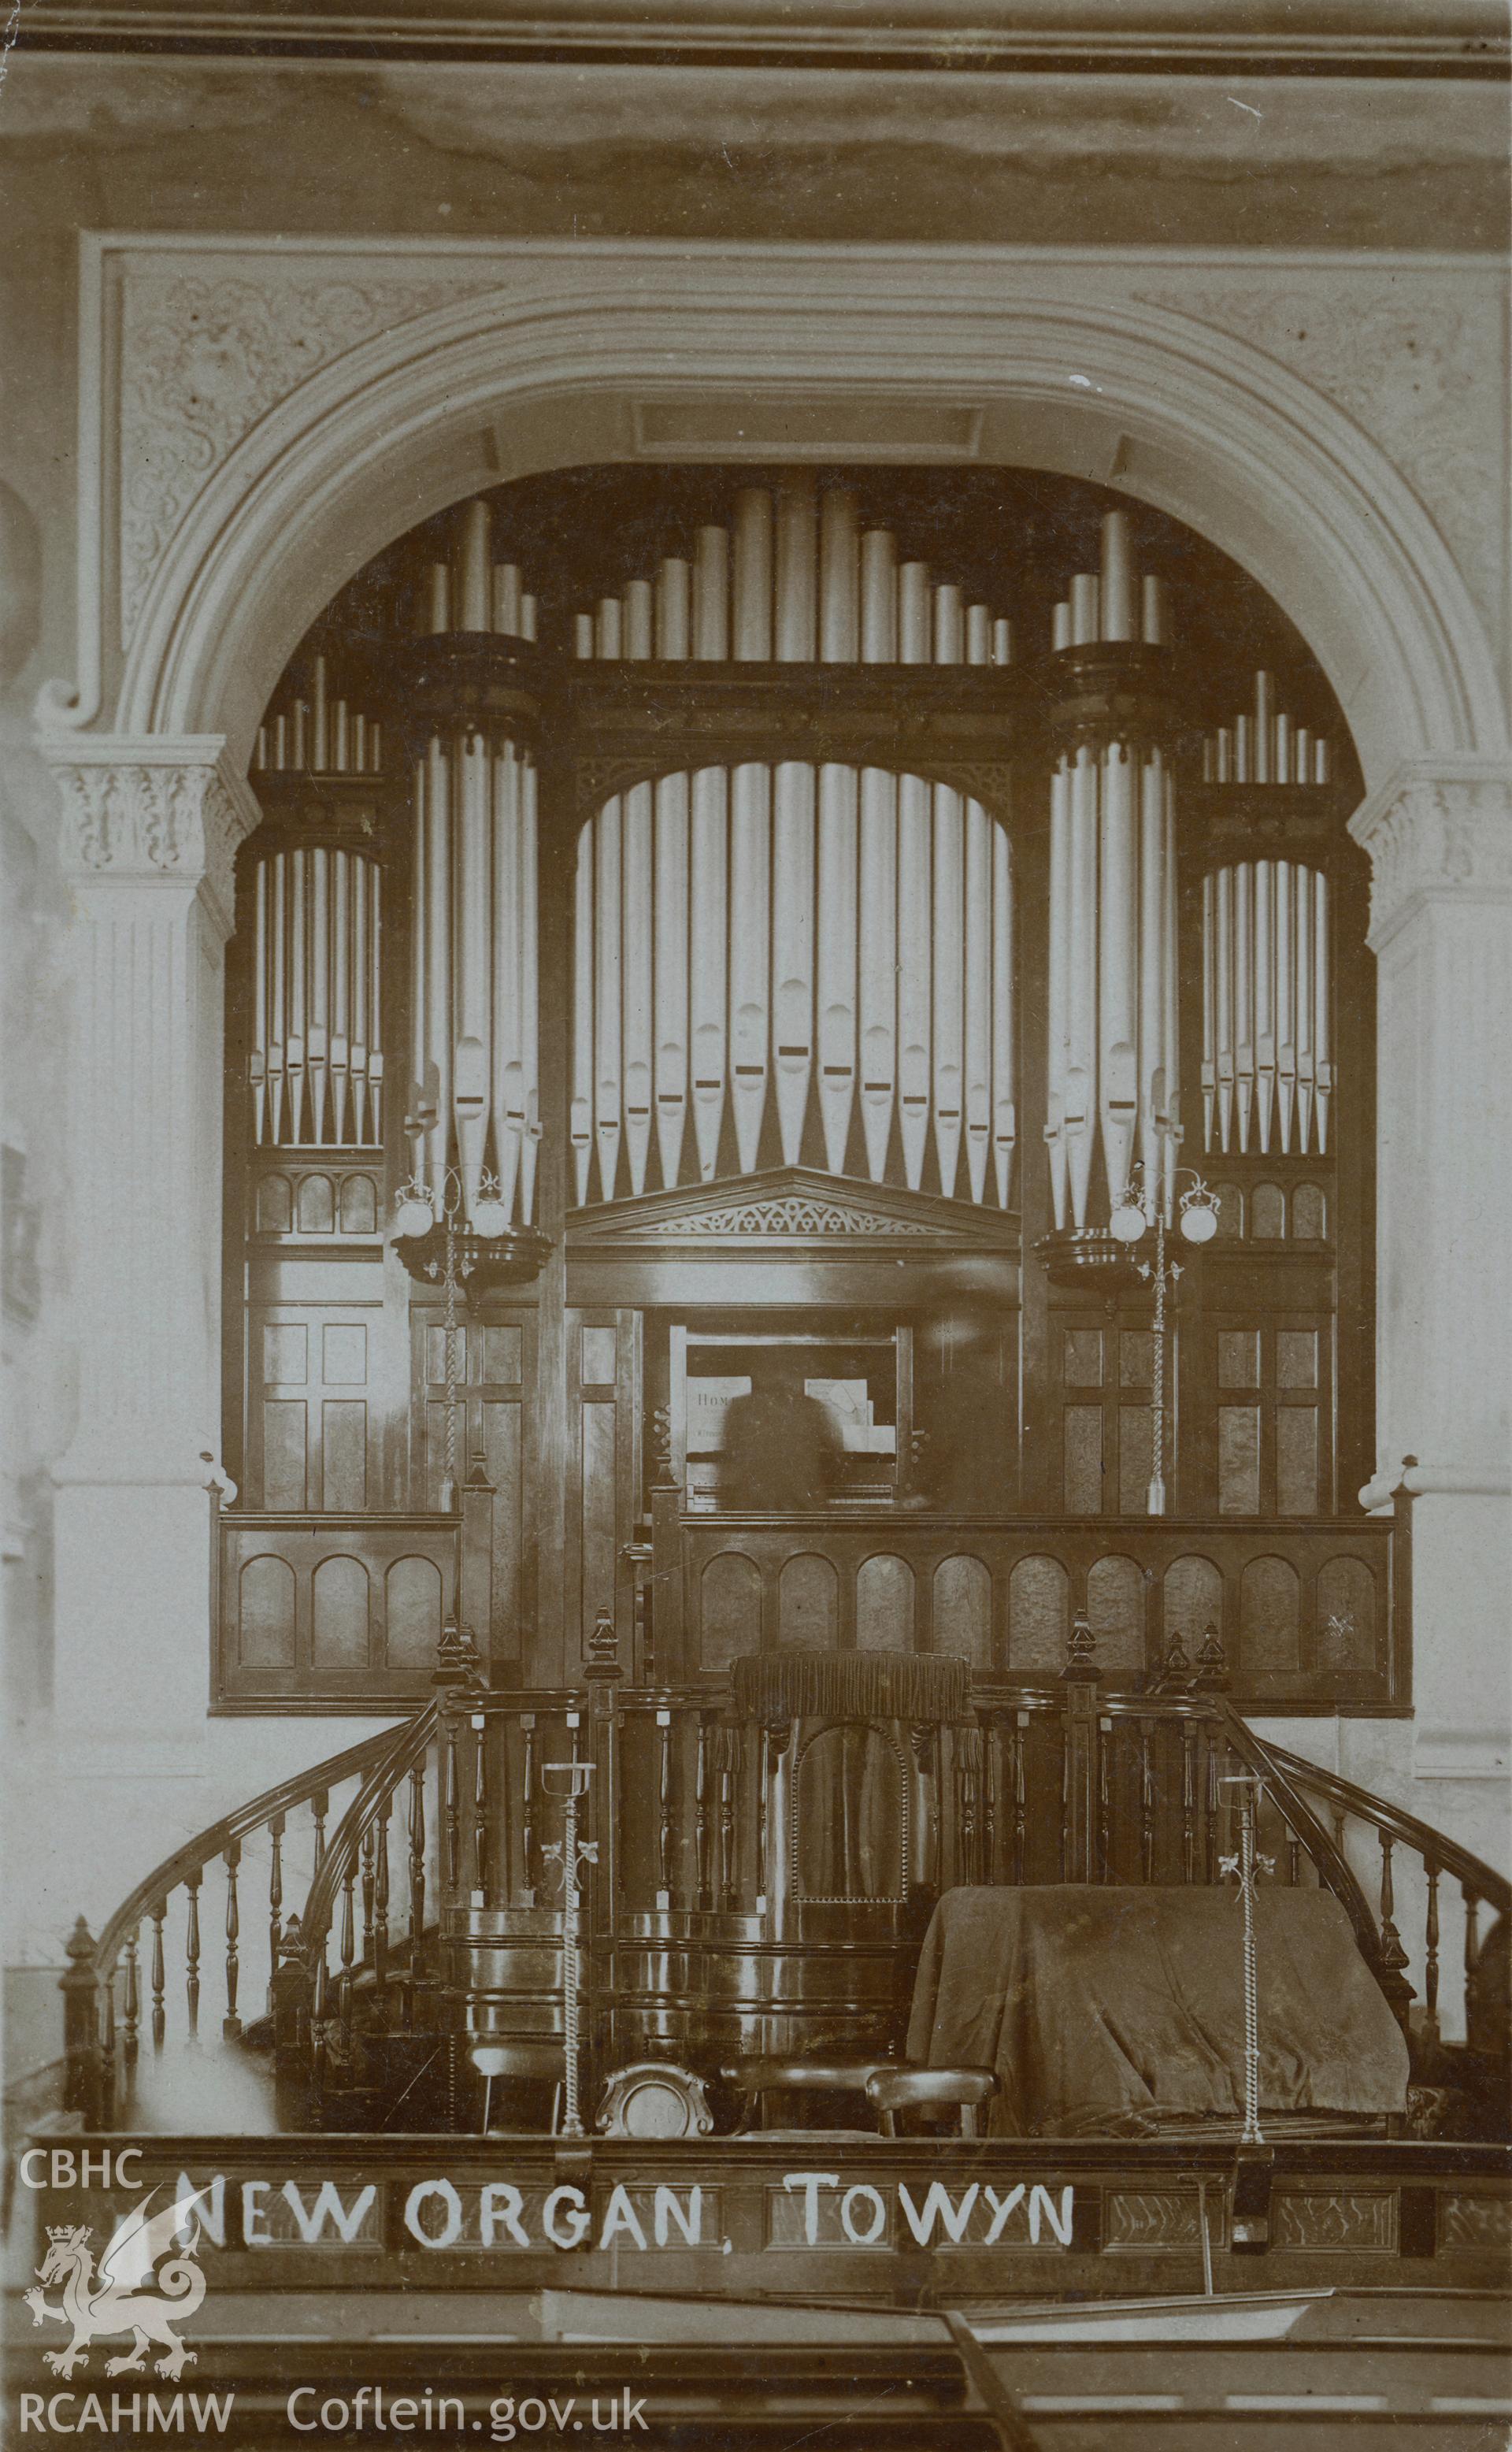 Digital copy of monochrome postcard showing the 'new organ' at Towyn Welsh Independent Chapel, New Quay. Postcard produced by Dierks & Brooks, Photographers, who had studios in Aberayron, New Quay and Llanon. Loaned for copying by Thomas Lloyd.